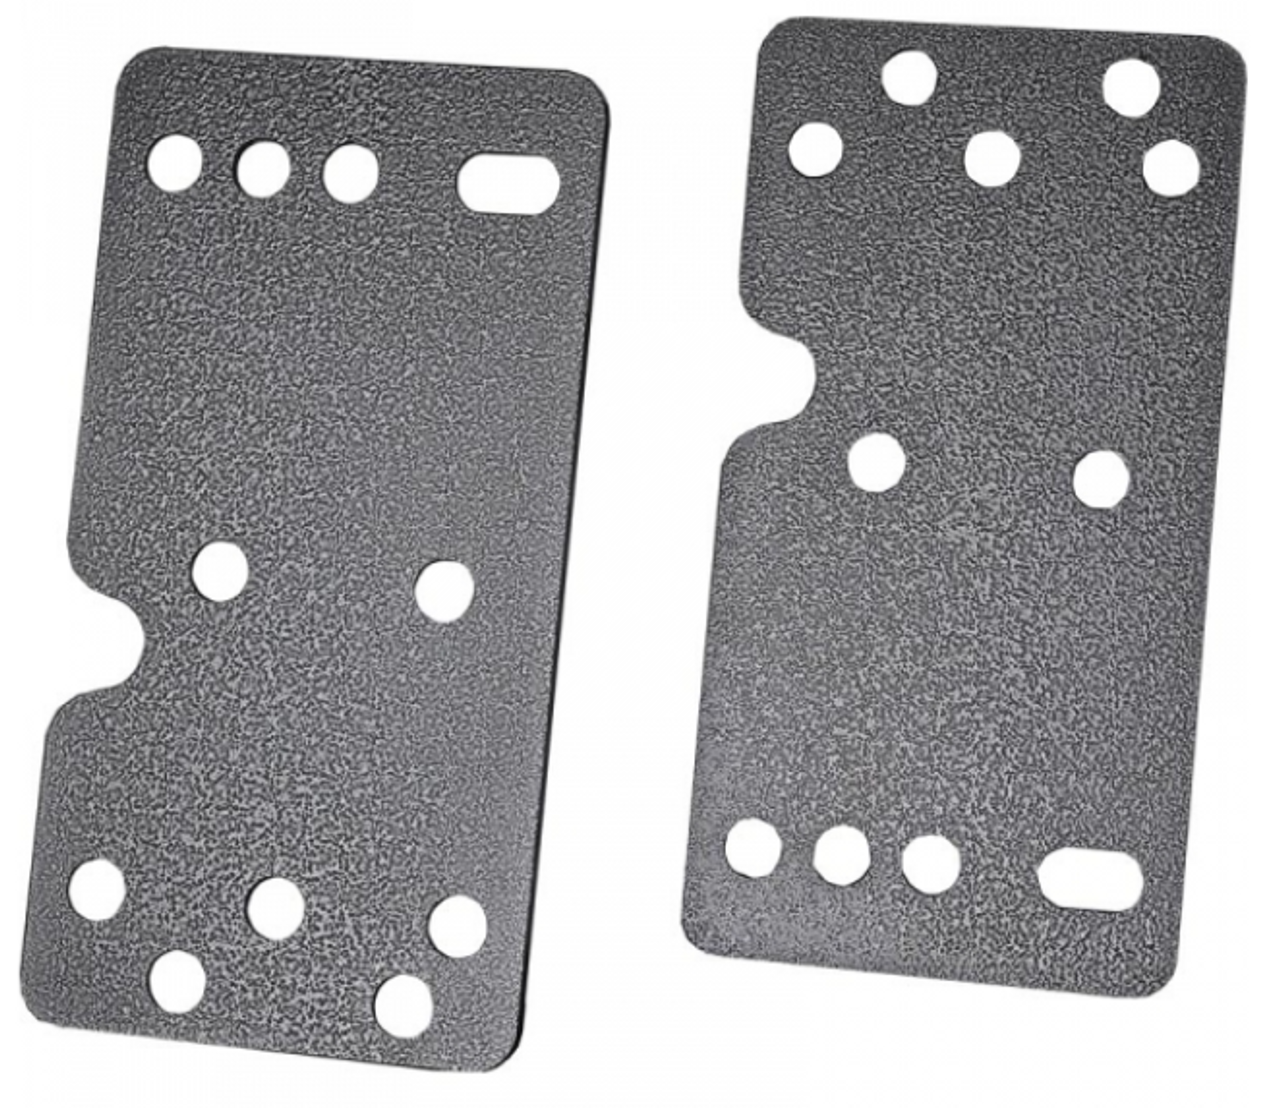 GEN Y Hitch Fifth Wheel 1/4" Shim Plates (2 Pack) For Use With 12.5" Wide Wing Openings (GH-8000)-Main View